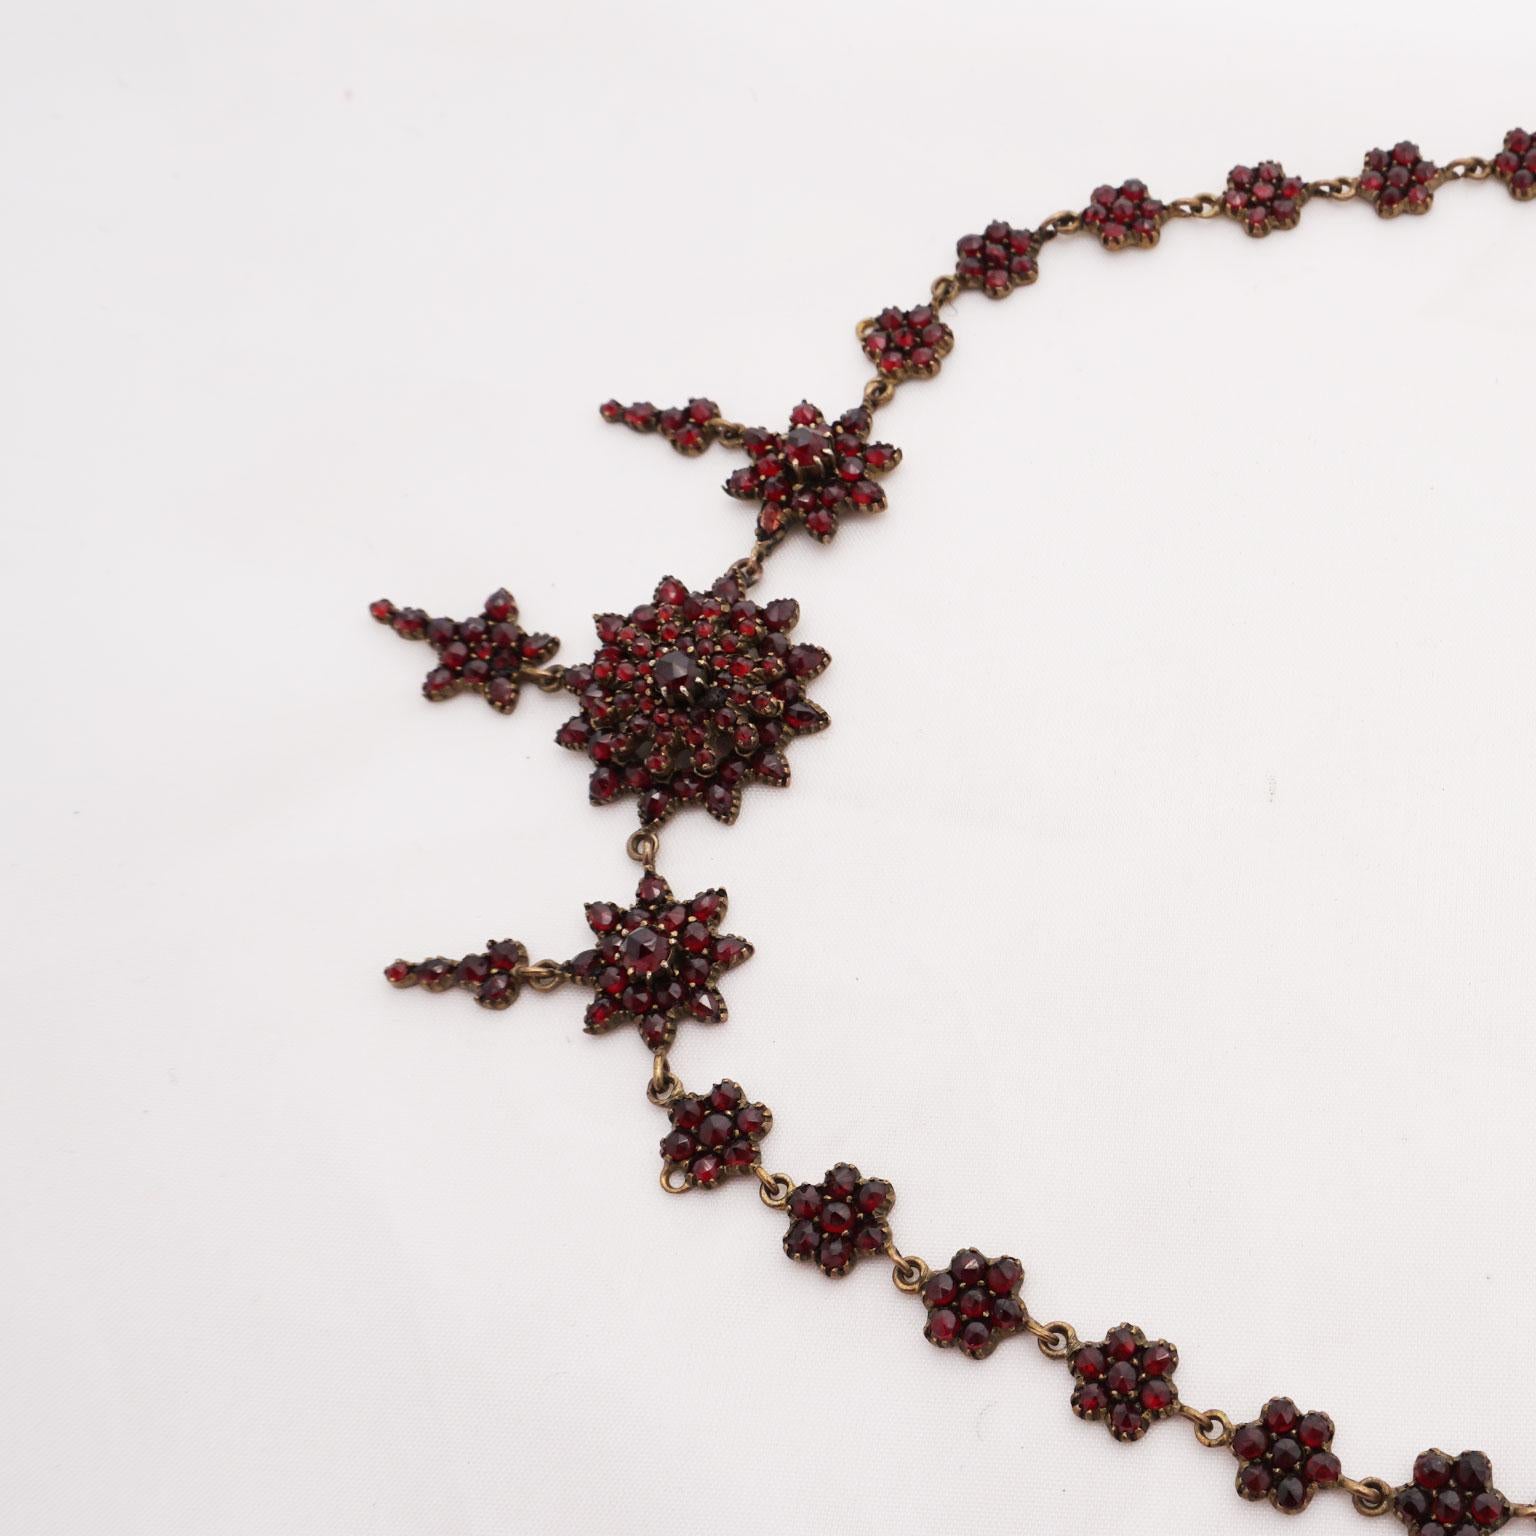 Garnet necklace around 1800
Sumptuous necklace from the time of classicism, worked in tombak, set with Bohemian garnet stones all around. The necklace is made of 26 small star links, each with five garnets. On the front side this necklace shows 3